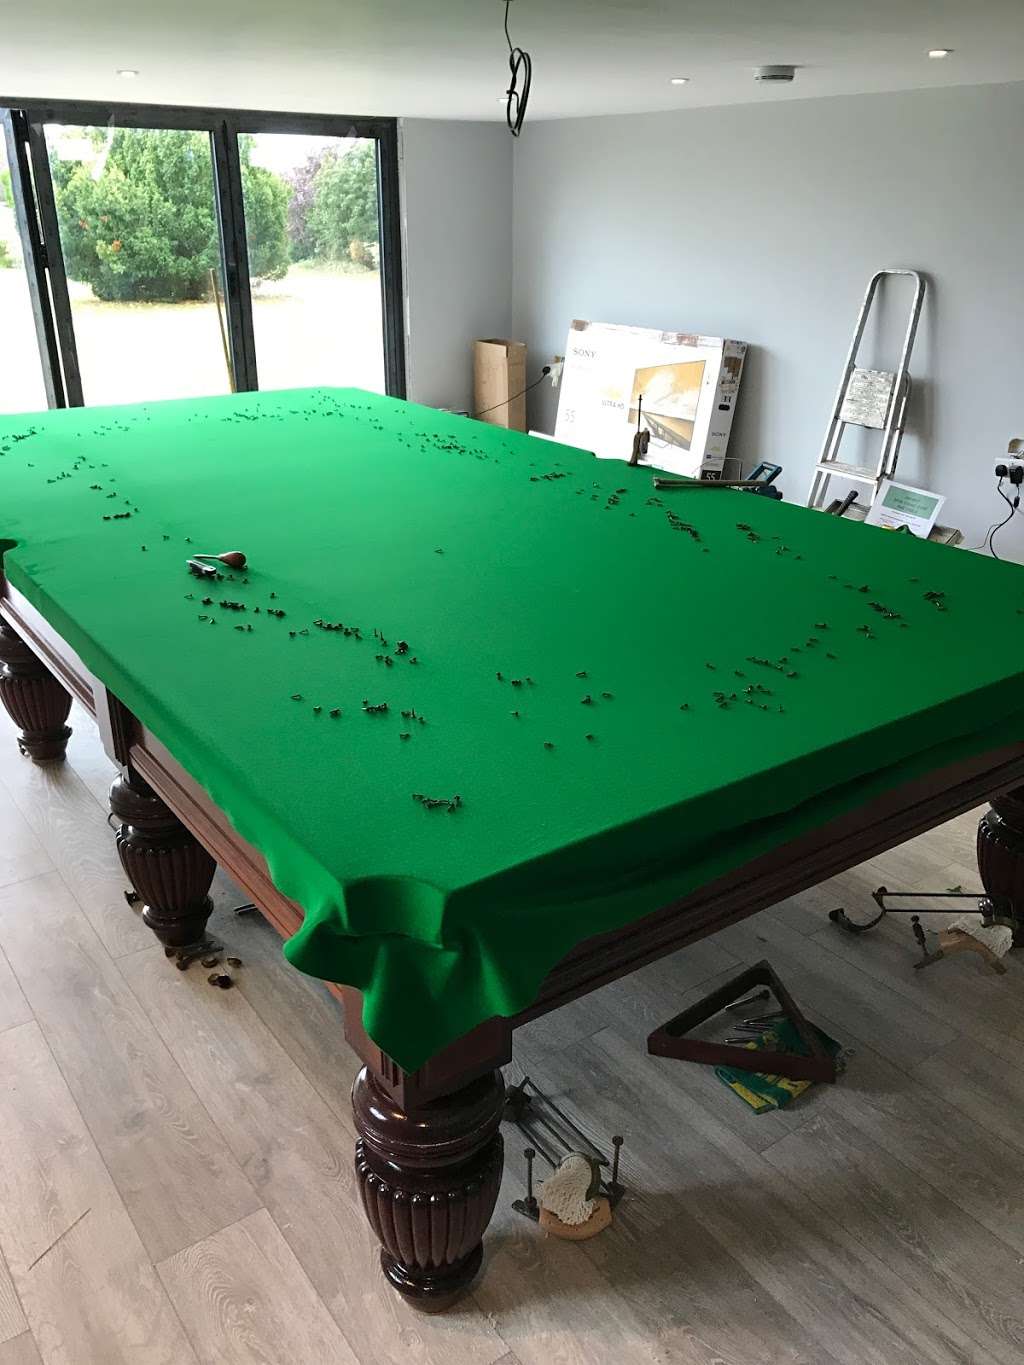 Keith Davis Snooker and Pool Services | Upper Bedfords Farm, Lower Bedfords Road, Romford RM1 4DQ, UK | Phone: 07973 675385